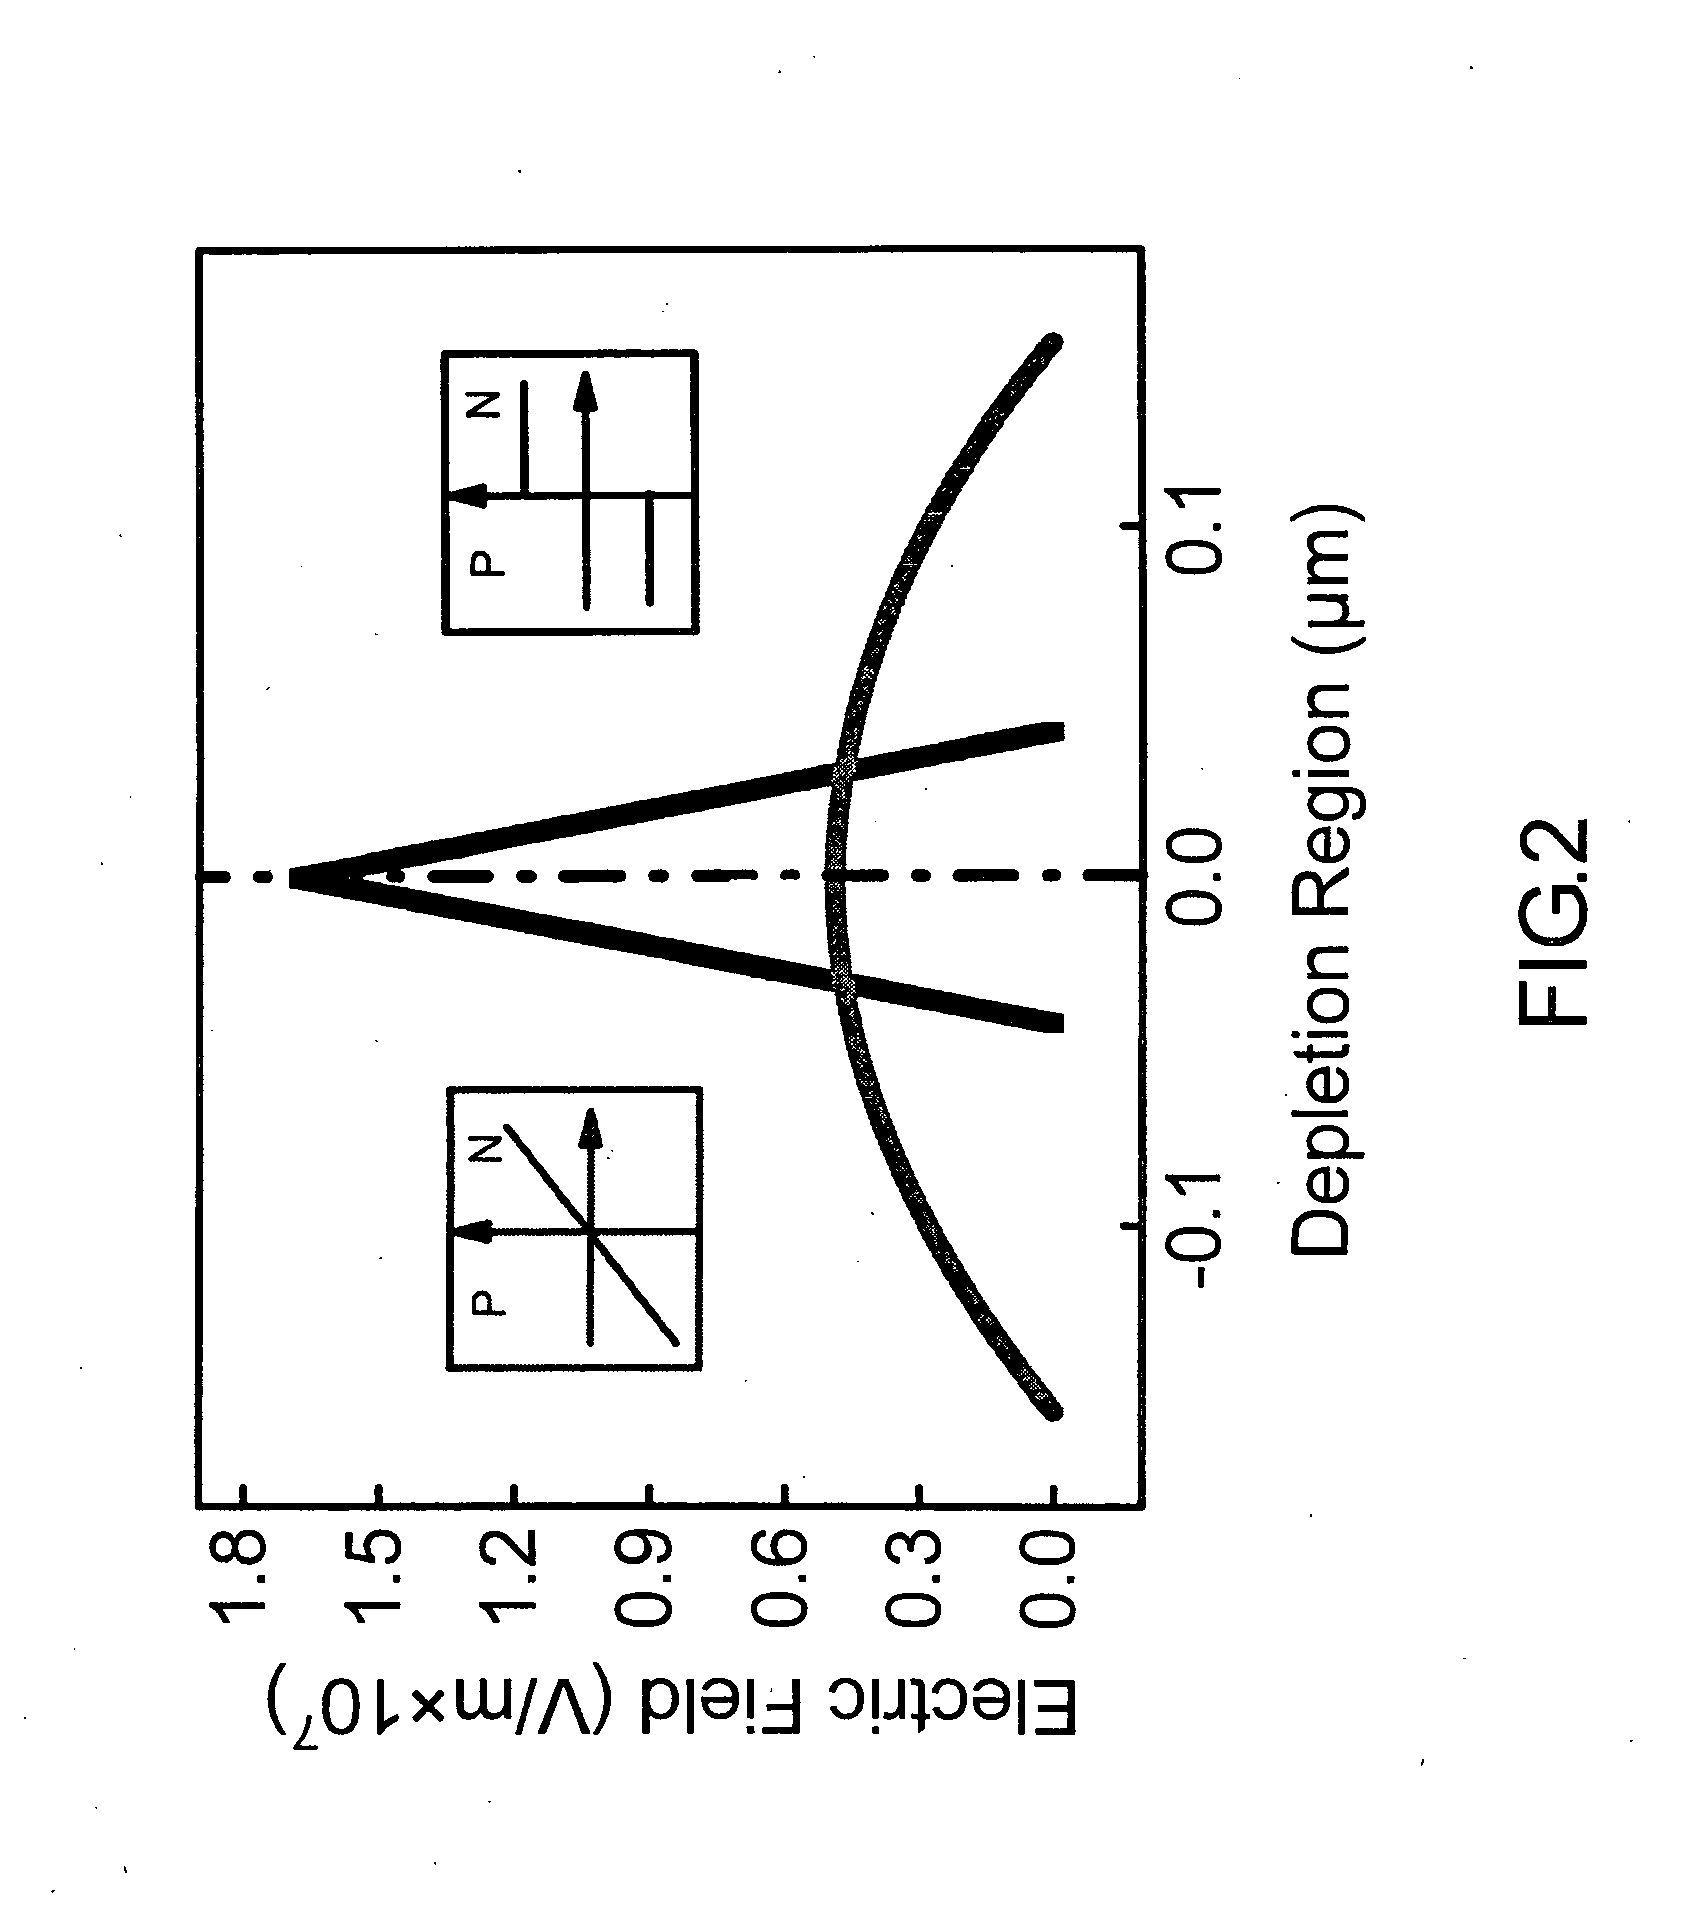 Structure improvement of depletion region in p-i-n photodiode